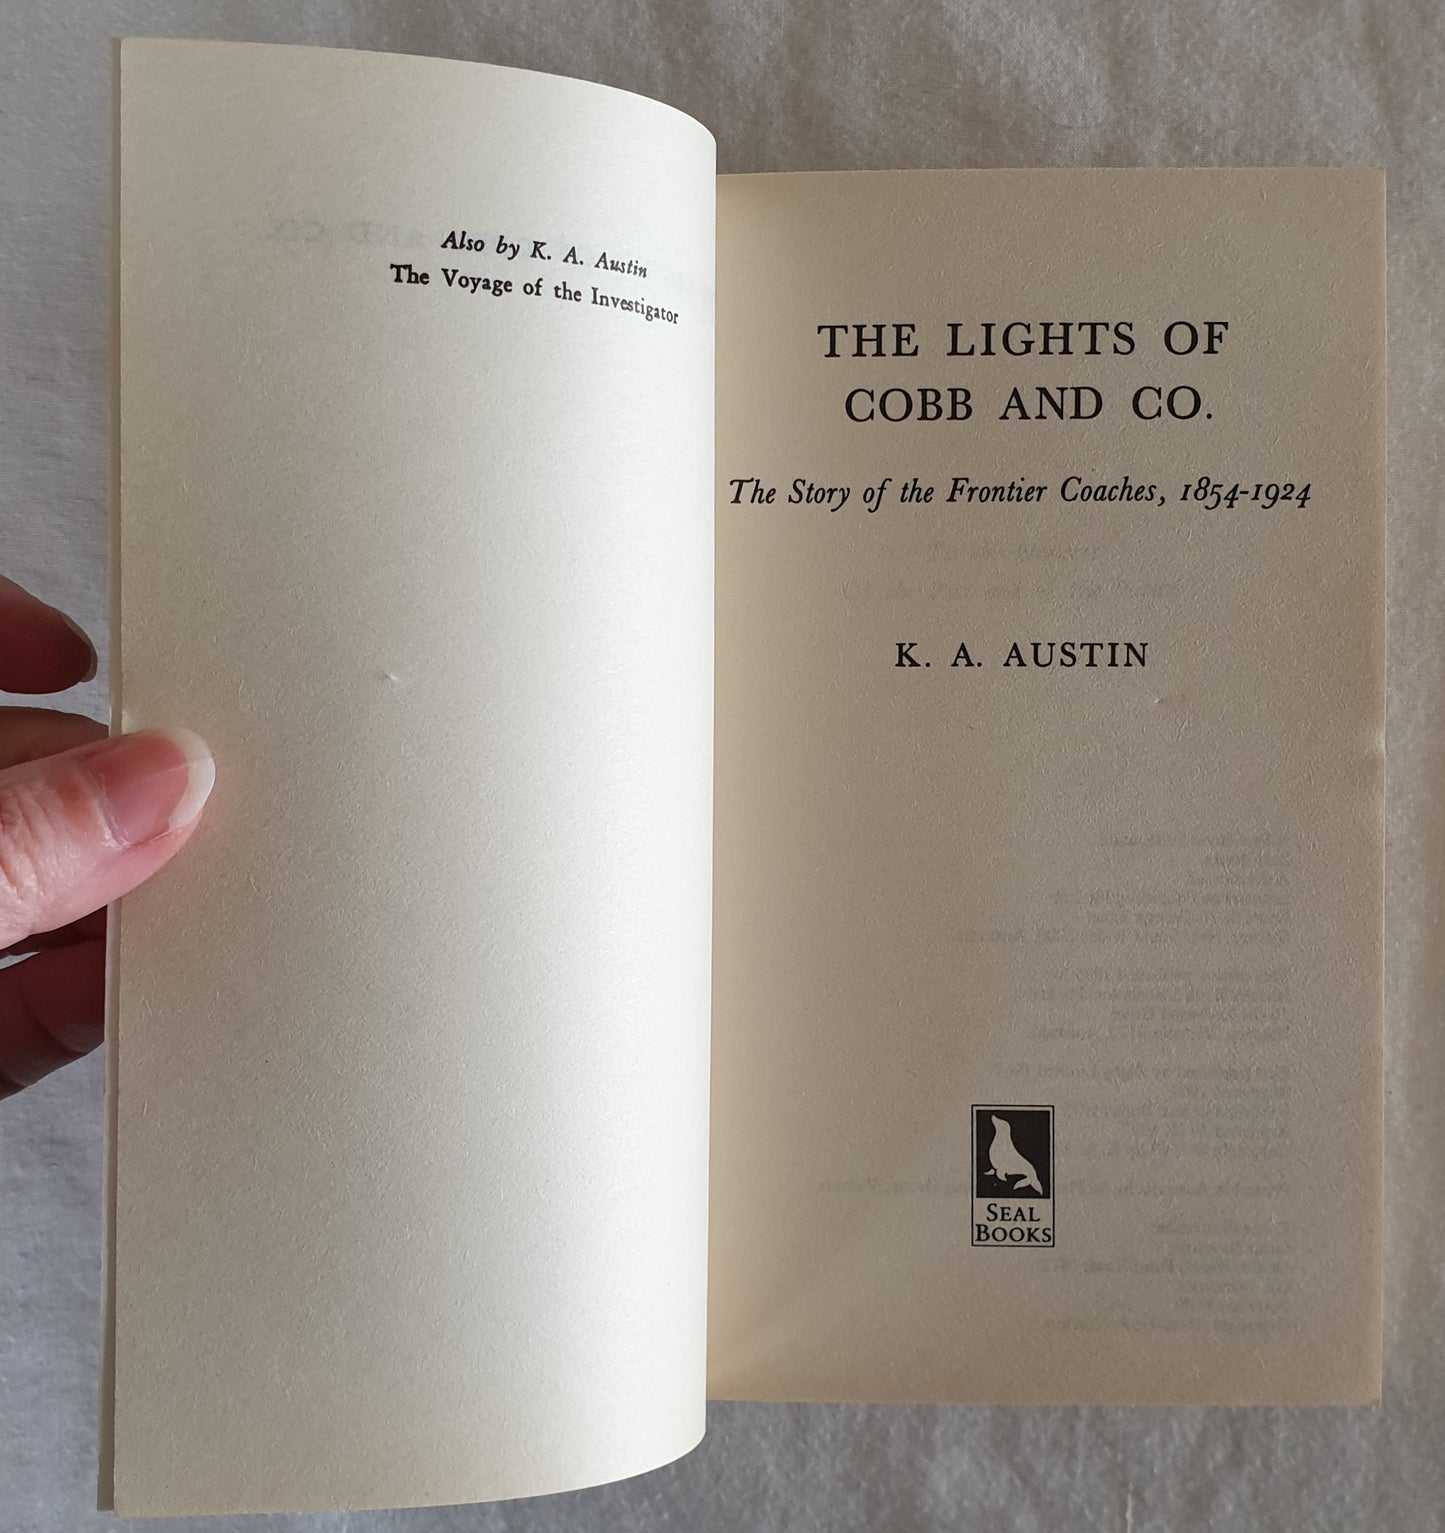 The Lights of Cobb and Co. / The Voyage of the Investigator by K. A. Austin